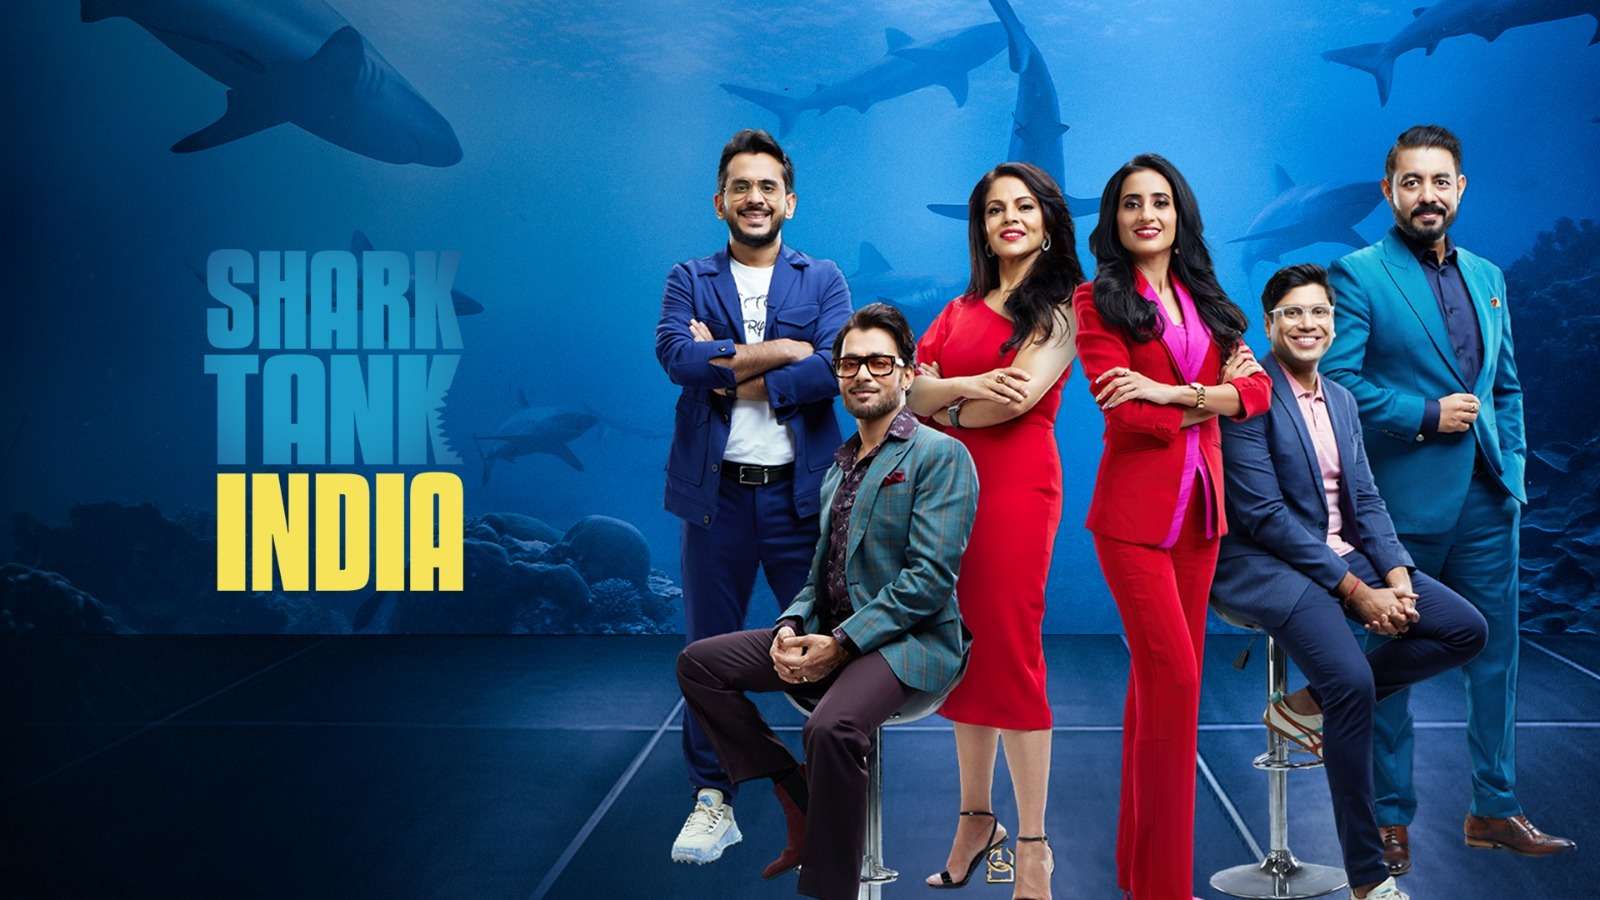 Shark Tank India: Discover the Top Entrepreneurs and Investment Opportunities in India's Thriving Startup Scene